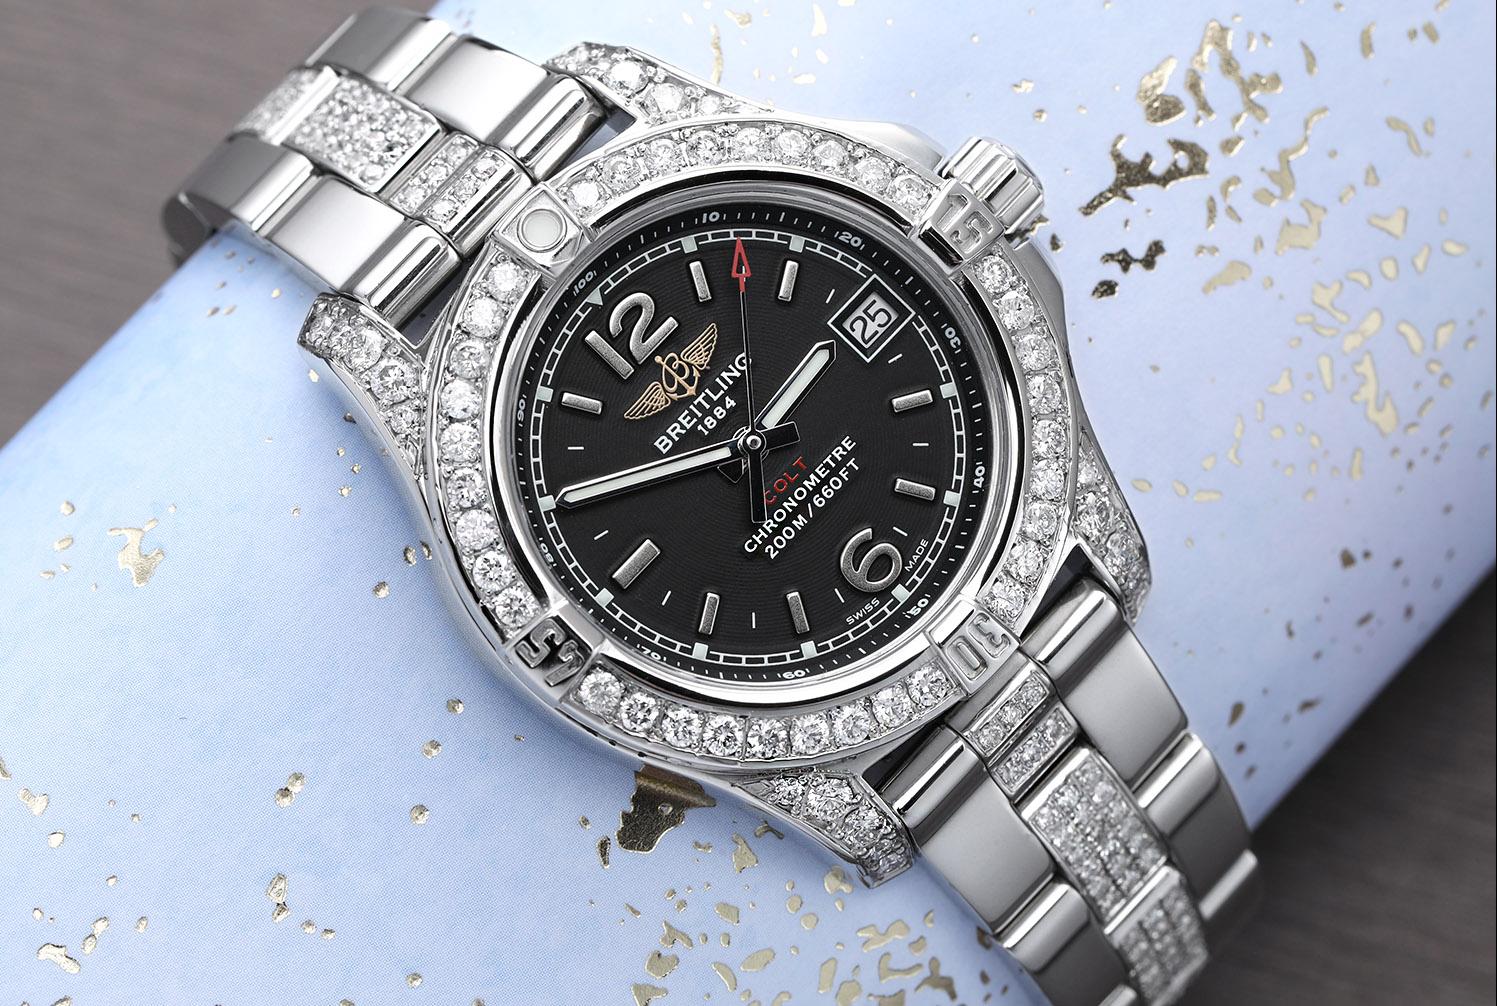 Breitling Colt 33 A77388 Black Dial Stainless Steel Ladies Watch with Diamonds. Diamonds are 100% natural, they have been customized aftermarket. Watch comes with a Breitling Box, Papers and an appraisal certificate. Attached to the appraisal is our